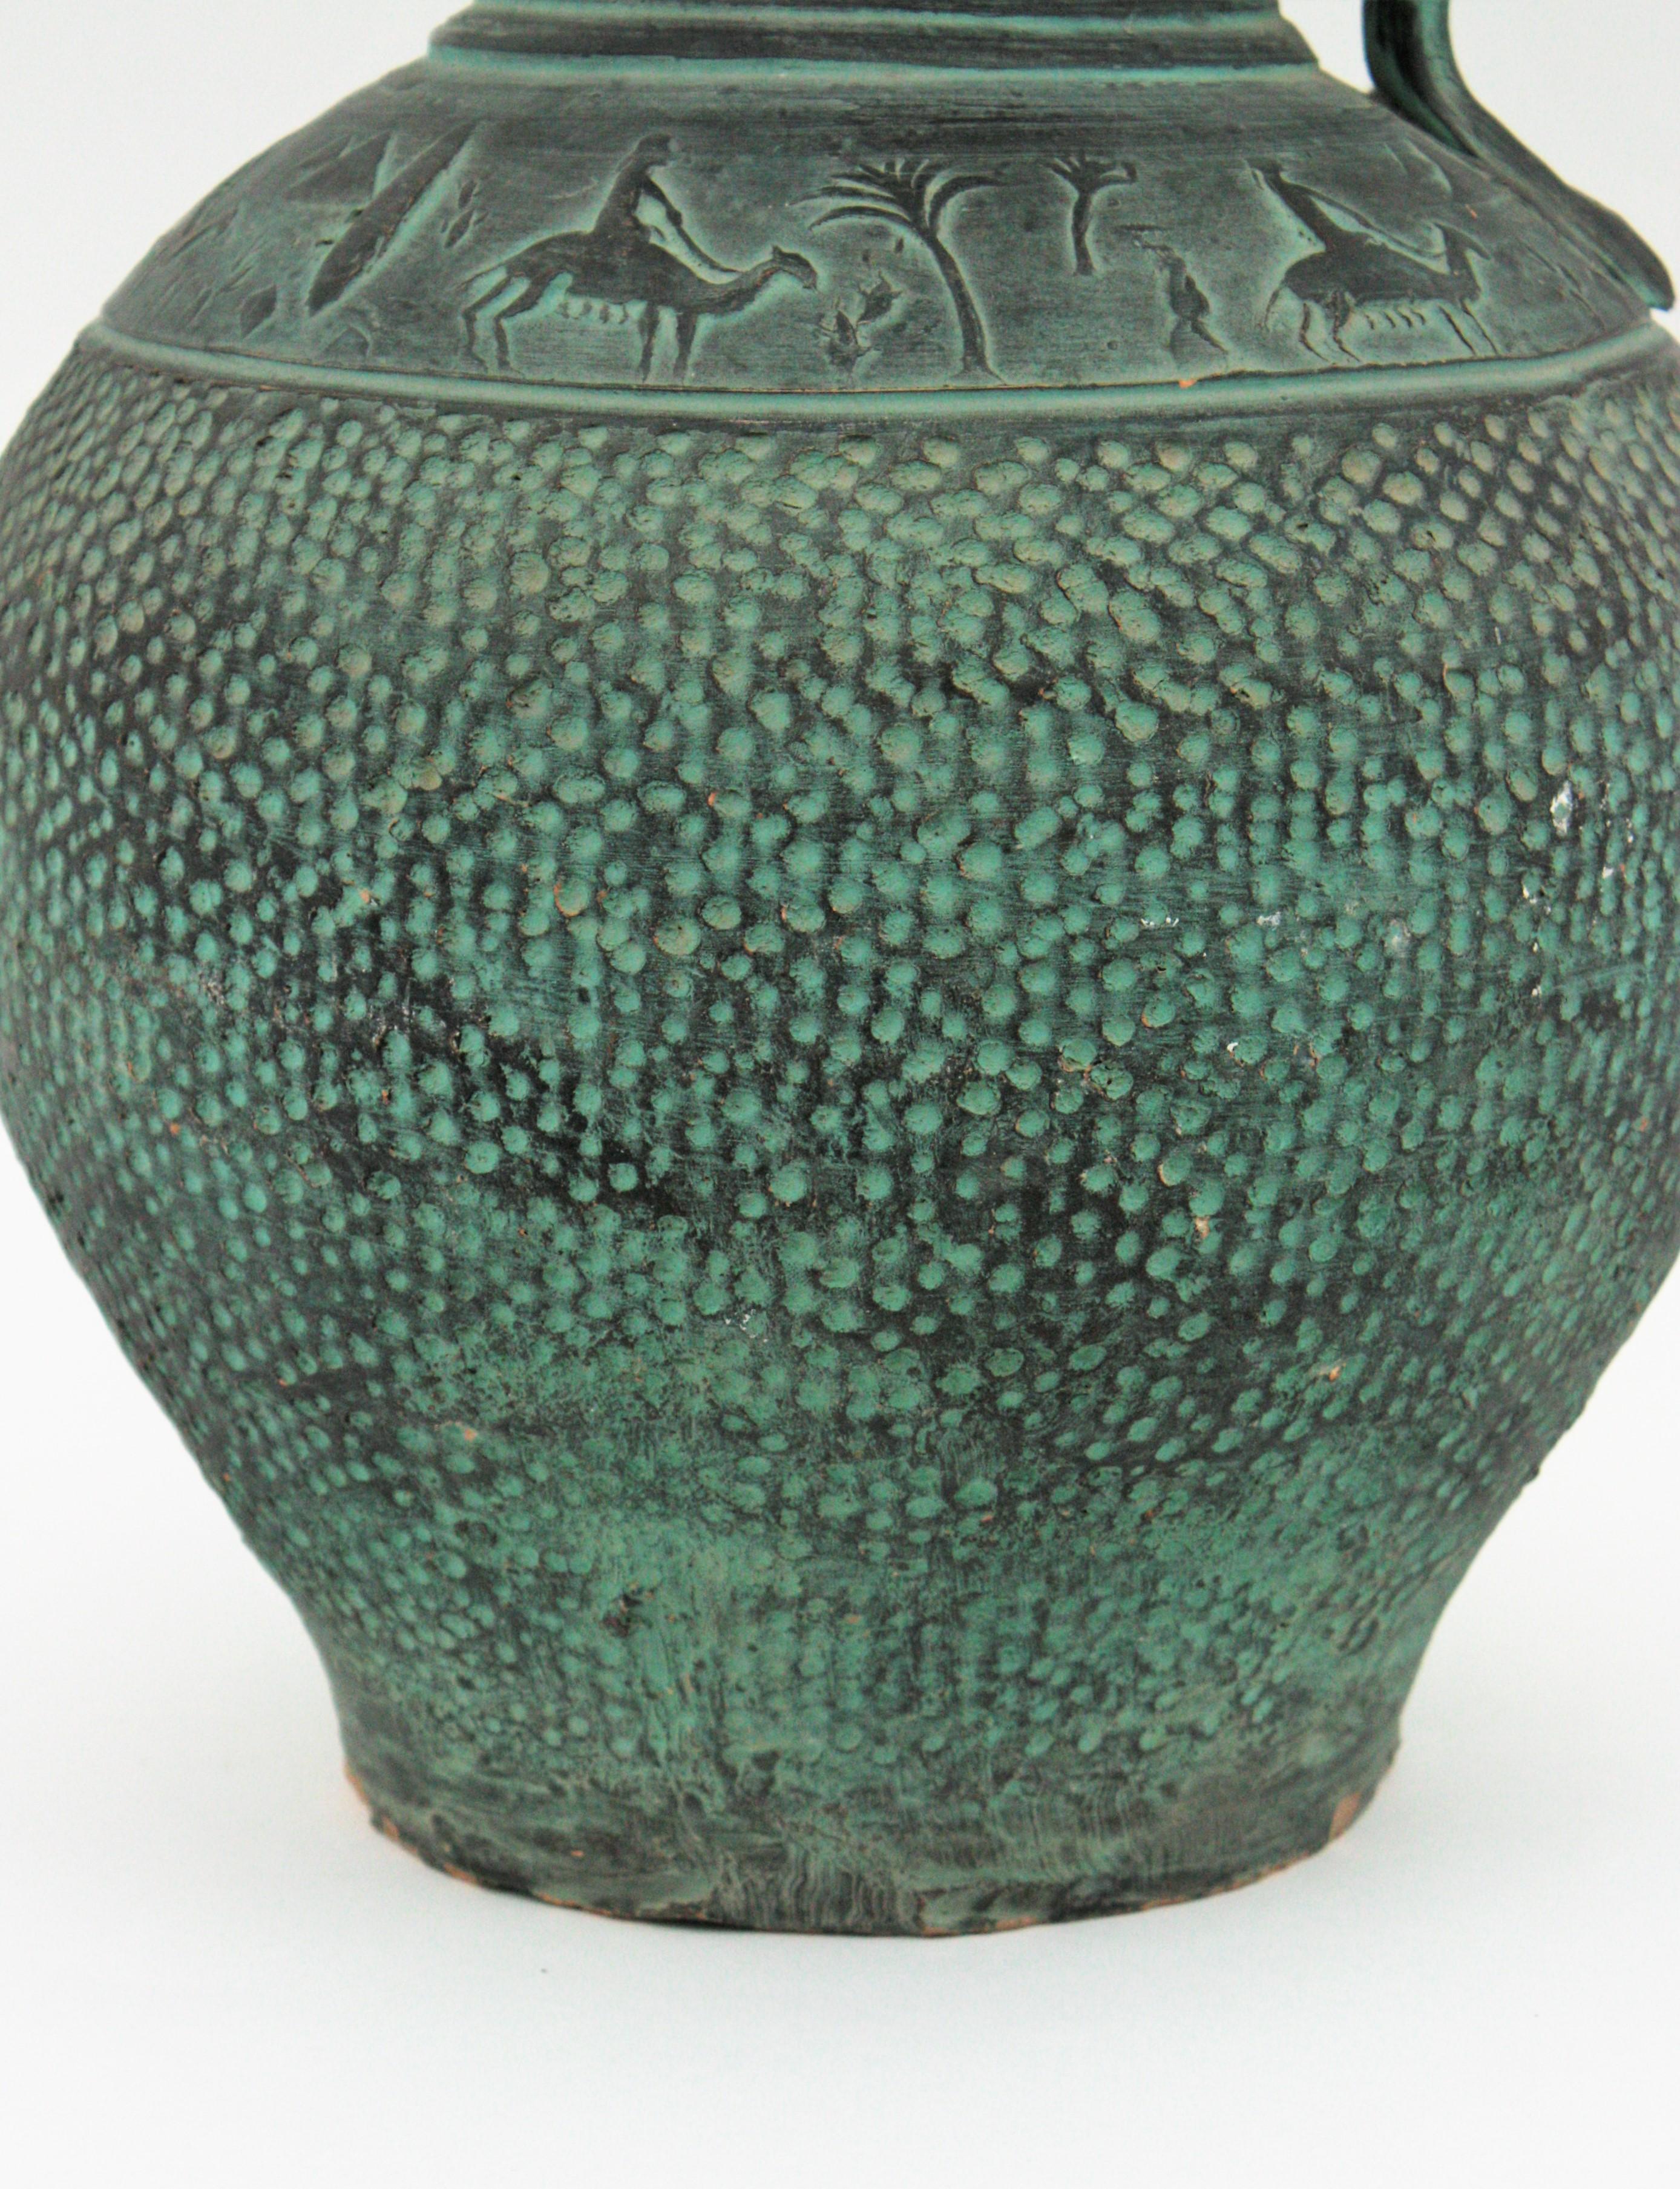 Hand-Crafted Spanish Green Terracota Urn Jug or Vessel For Sale